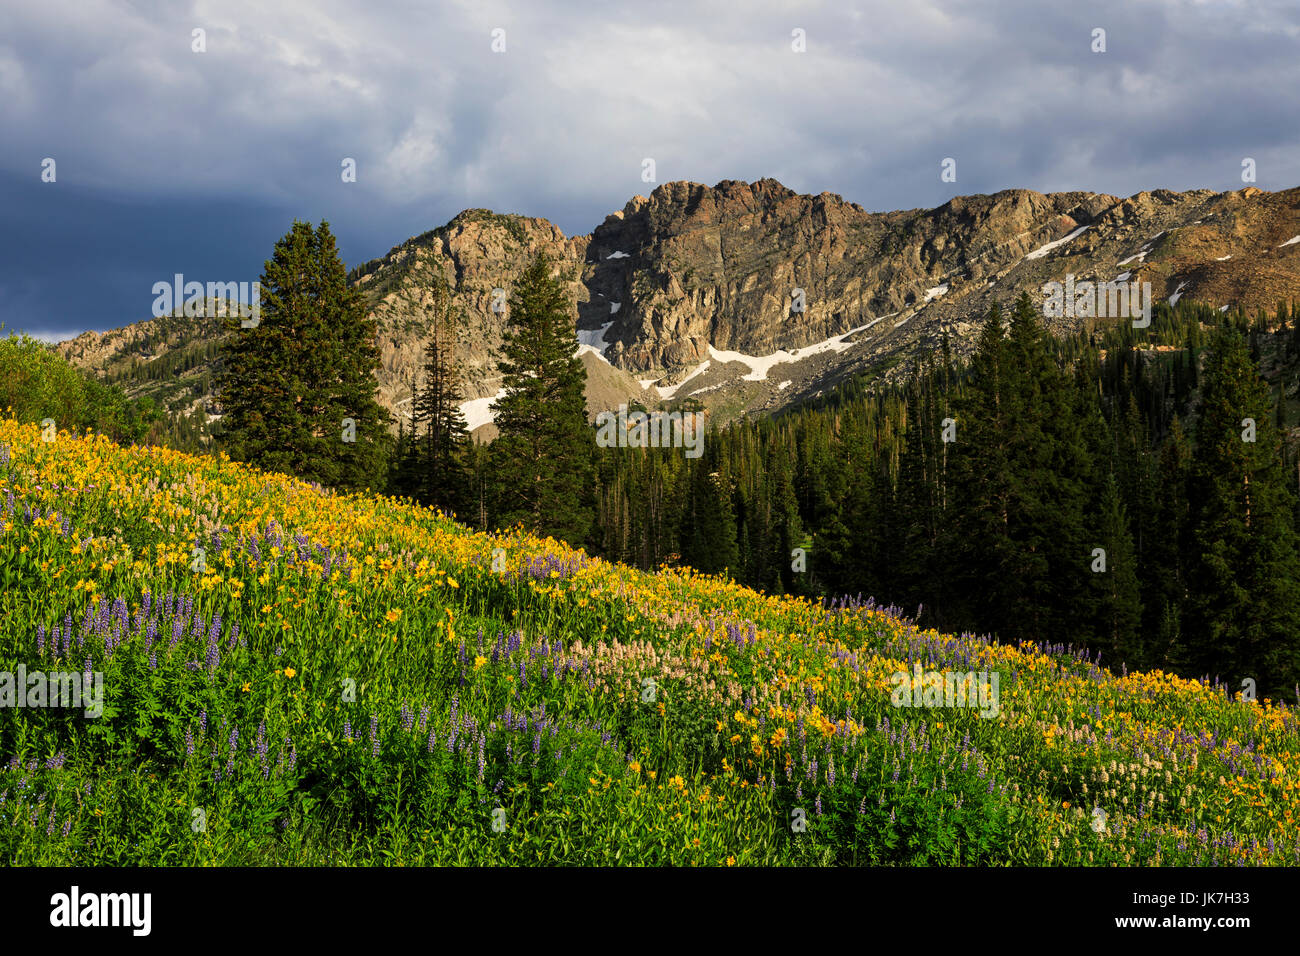 This is a view of a mountain named Devil's Castle in the Albion Basin area of Alta, Utah, USA.  This view looks south across a wildflower display. Stock Photo